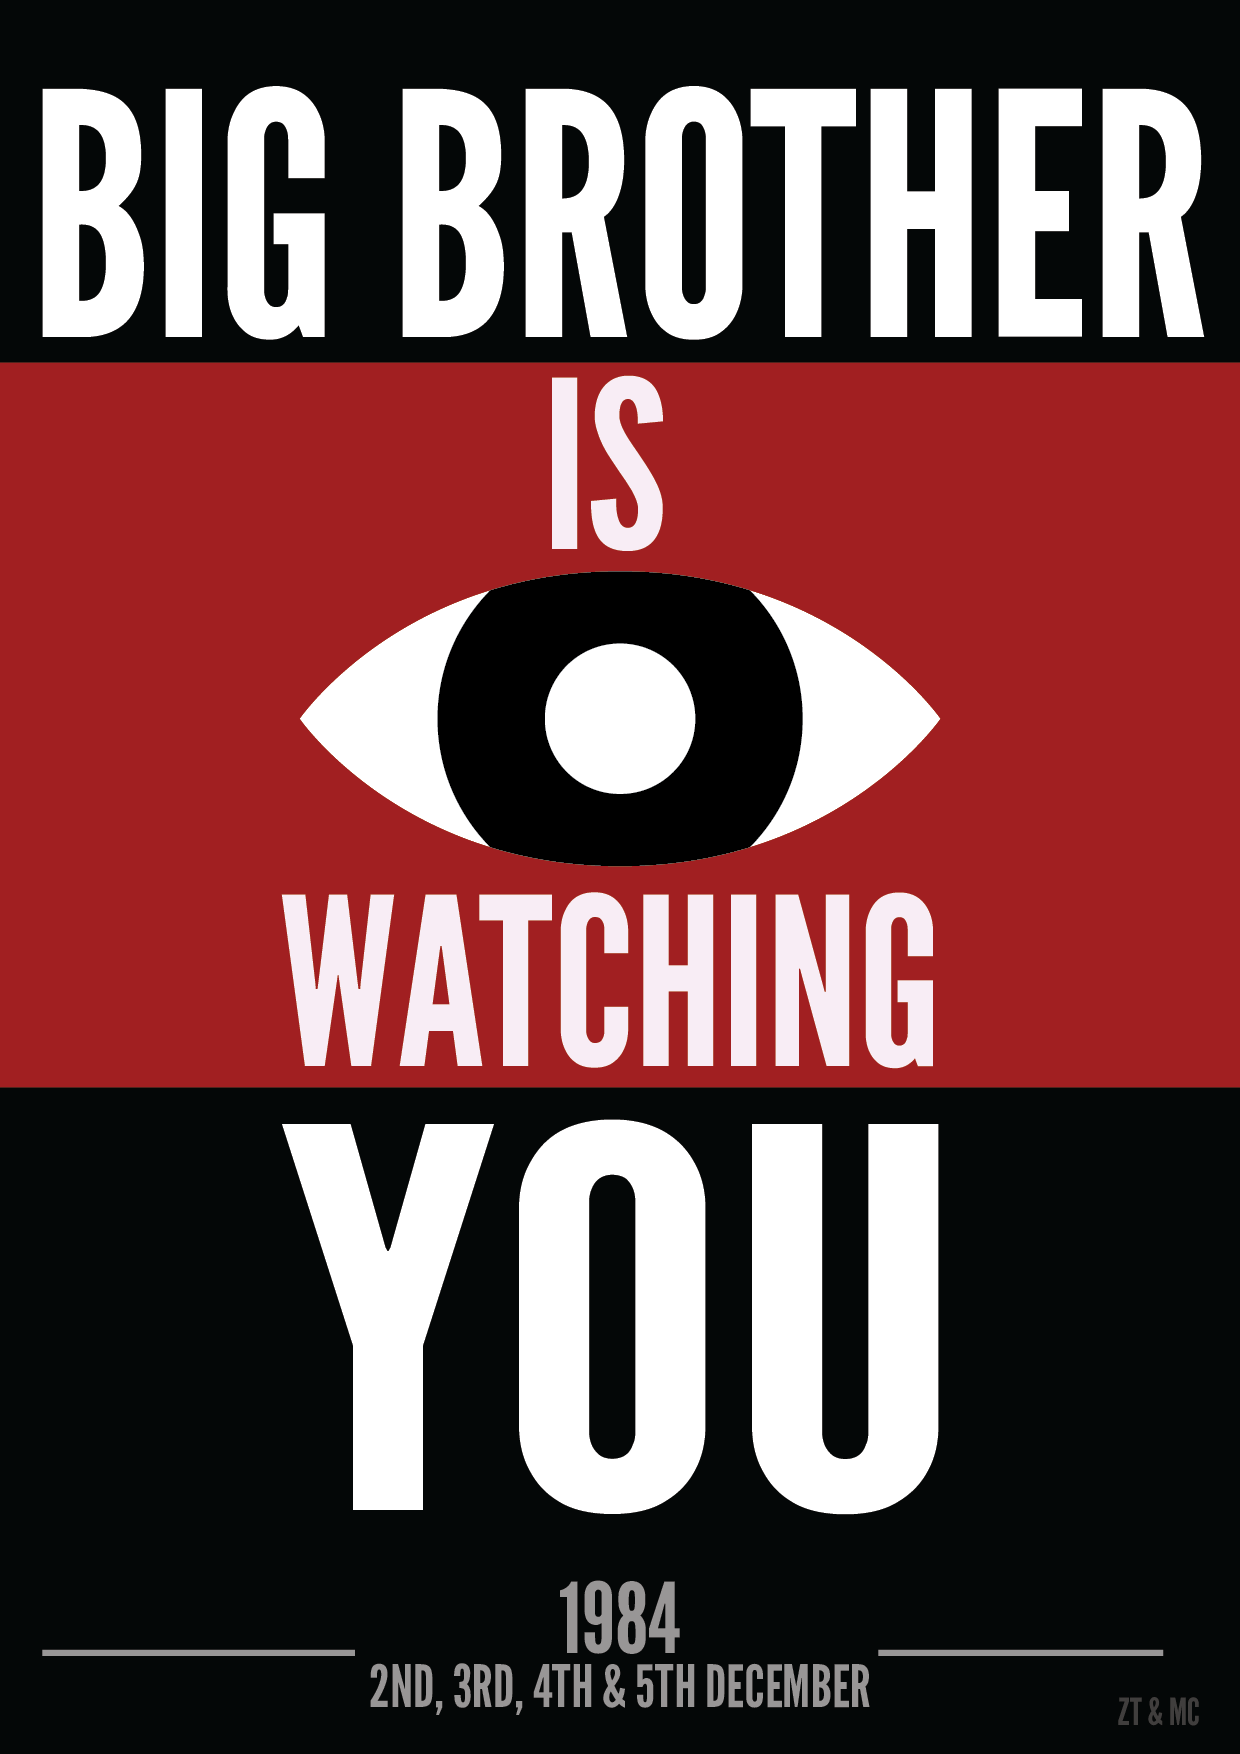 1984 Big Brother Funny Quotes. QuotesGram